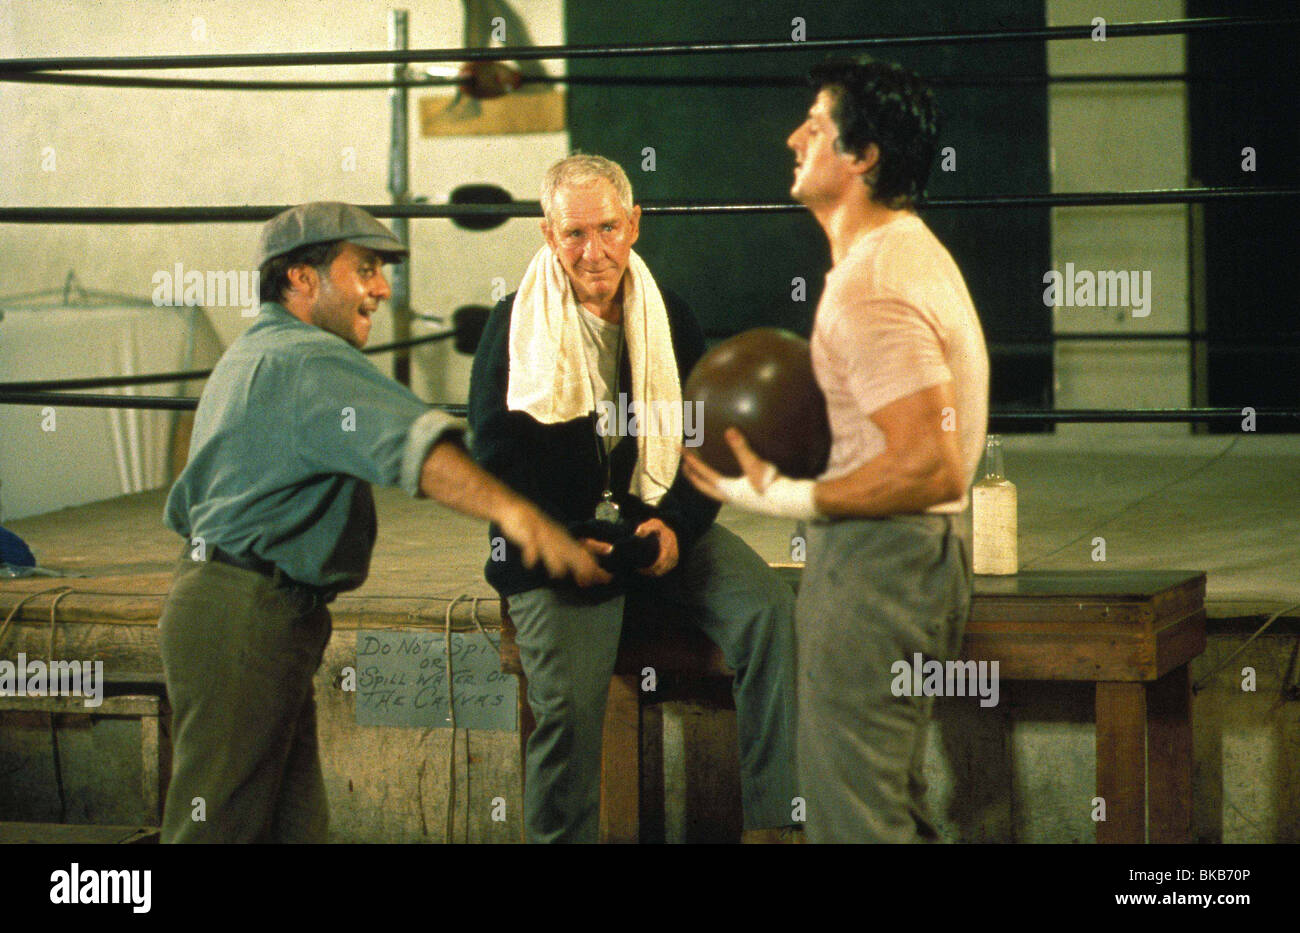 ROCKY (1976) BURGESS MEREDITH, SYLVESTER STALLONE RKY 026 L Stock Photo